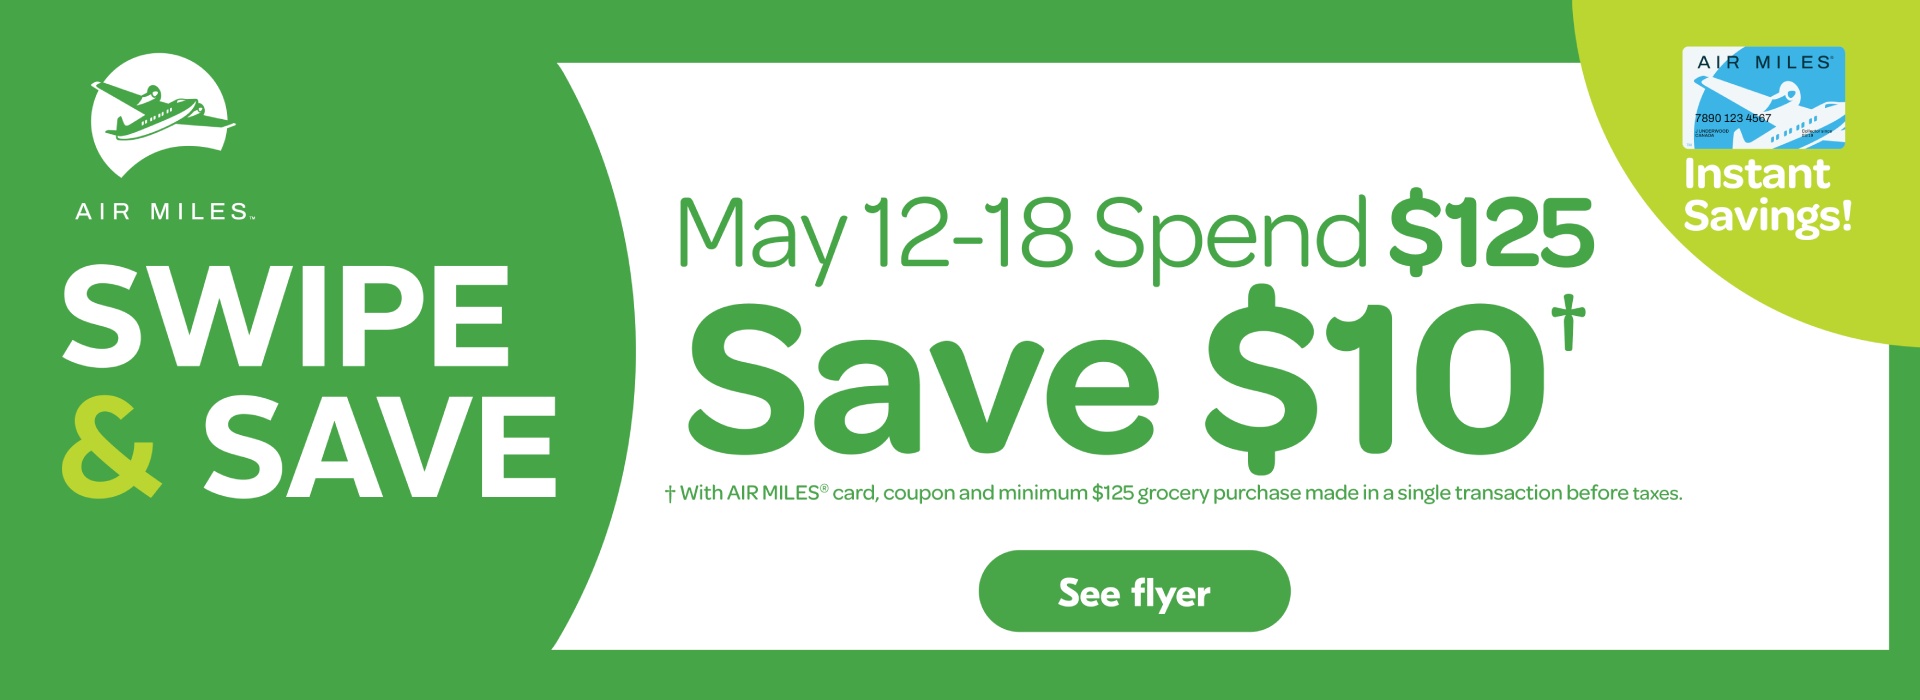 Text Reading 'Swipe and save from May 12th to May 18th. Spend $125 and save up to $10. With Air Miles card, coupon and minimum $125 grocery purchase made in a single transaction before taxes. Click on the 'See flyer' button below for more information.'